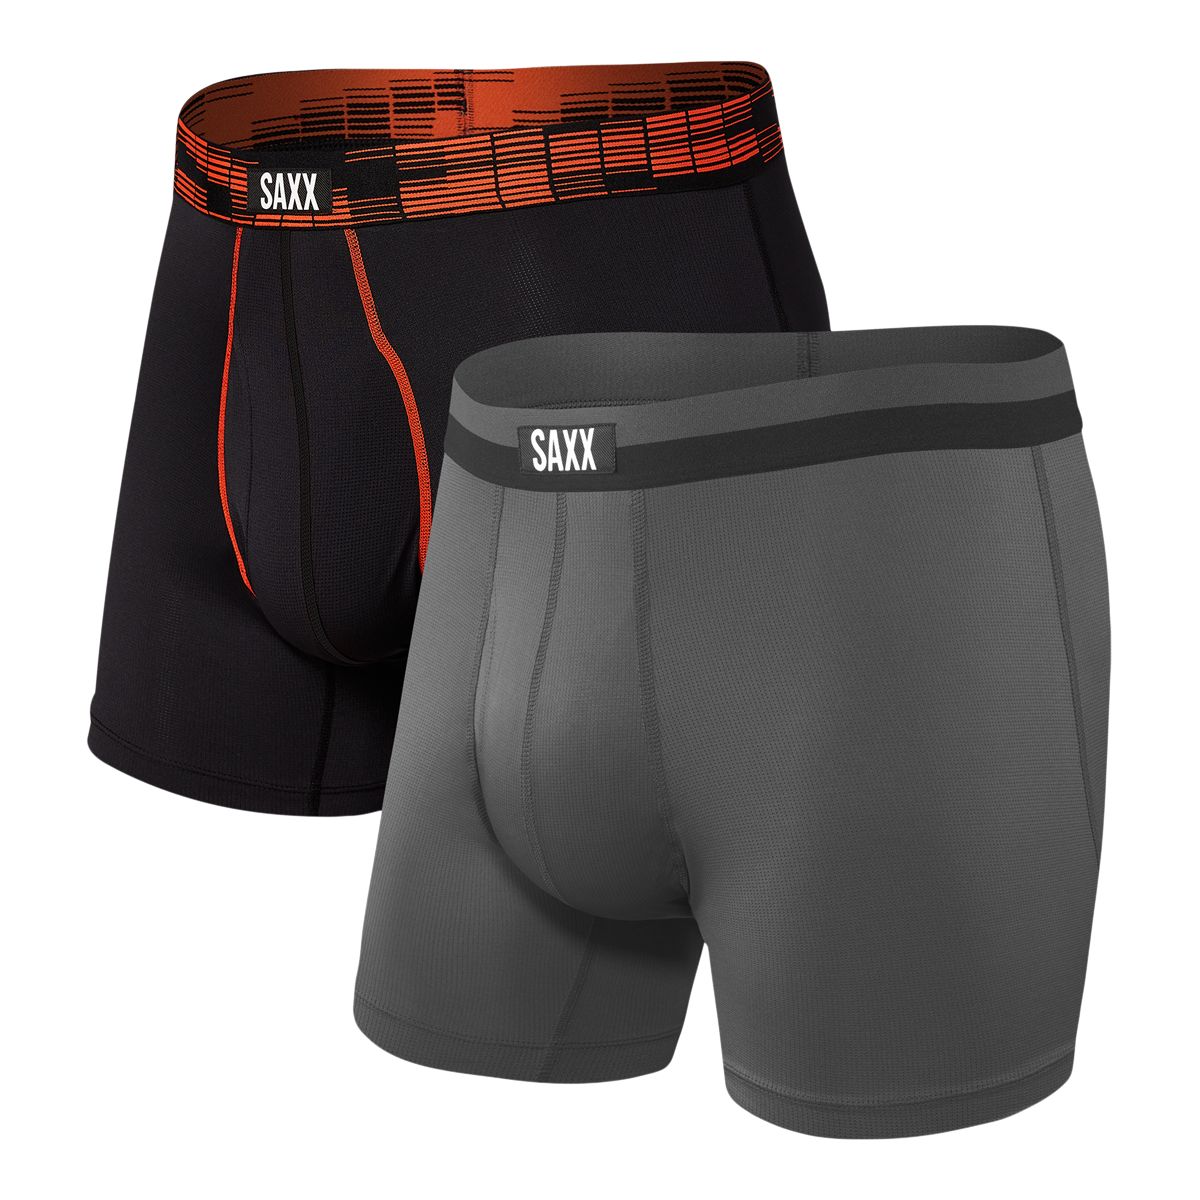 https://media-www.sportchek.ca/product/div-03-softgoods/dpt-79-clothing-accessories/sdpt-01-mens/333498684/saxx-sport-mesh-boxer-brief-2pk-121-blk-gry-104c7aa5-c205-40f6-921b-58692ed4ac9e-jpgrendition.jpg?imdensity=1&imwidth=640&impolicy=mZoom